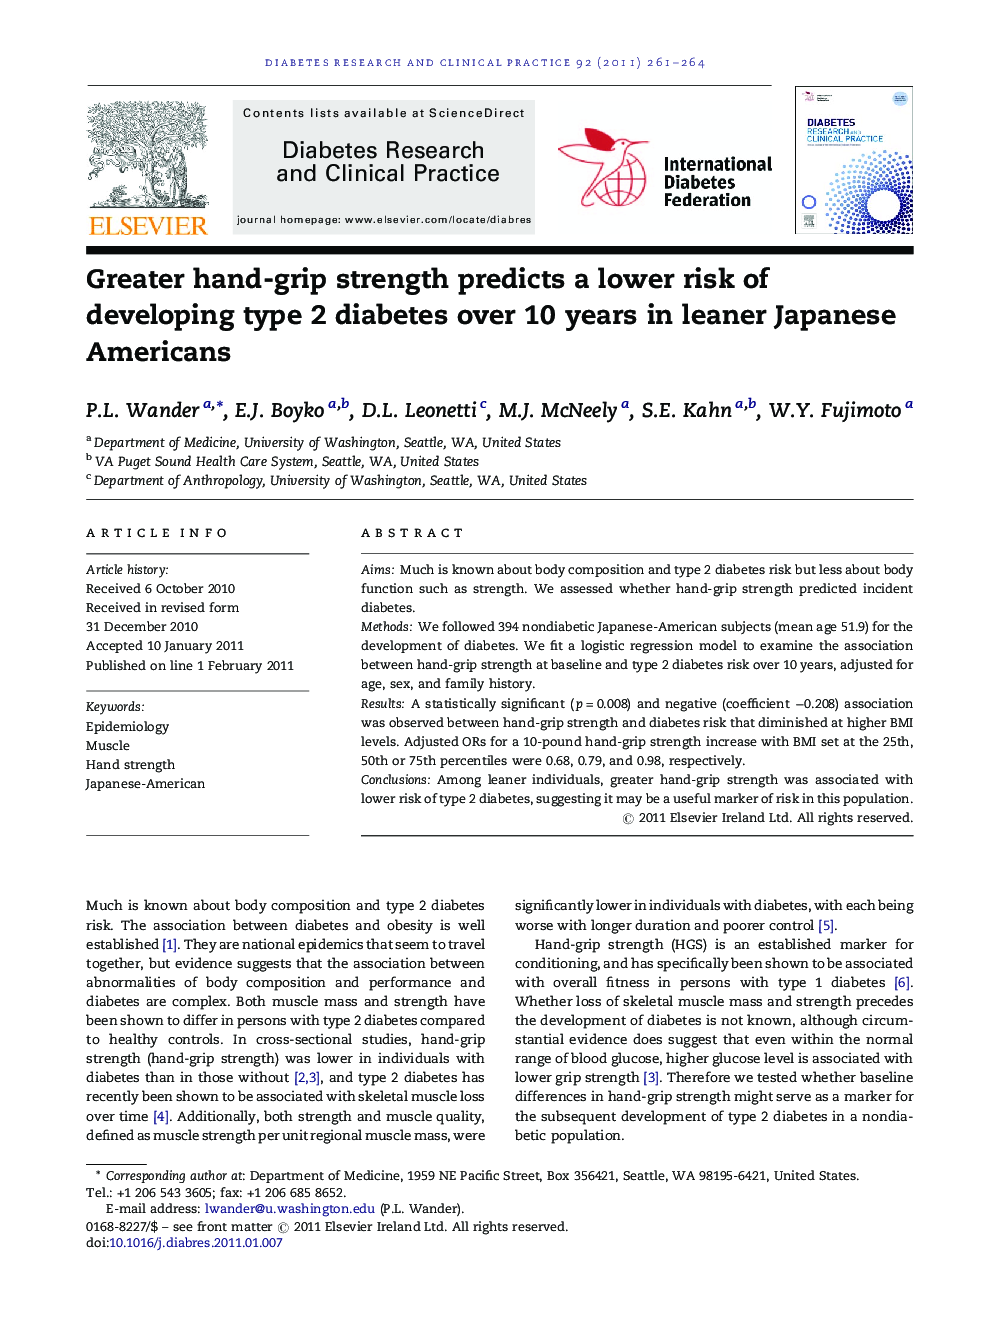 Greater hand-grip strength predicts a lower risk of developing type 2 diabetes over 10 years in leaner Japanese Americans